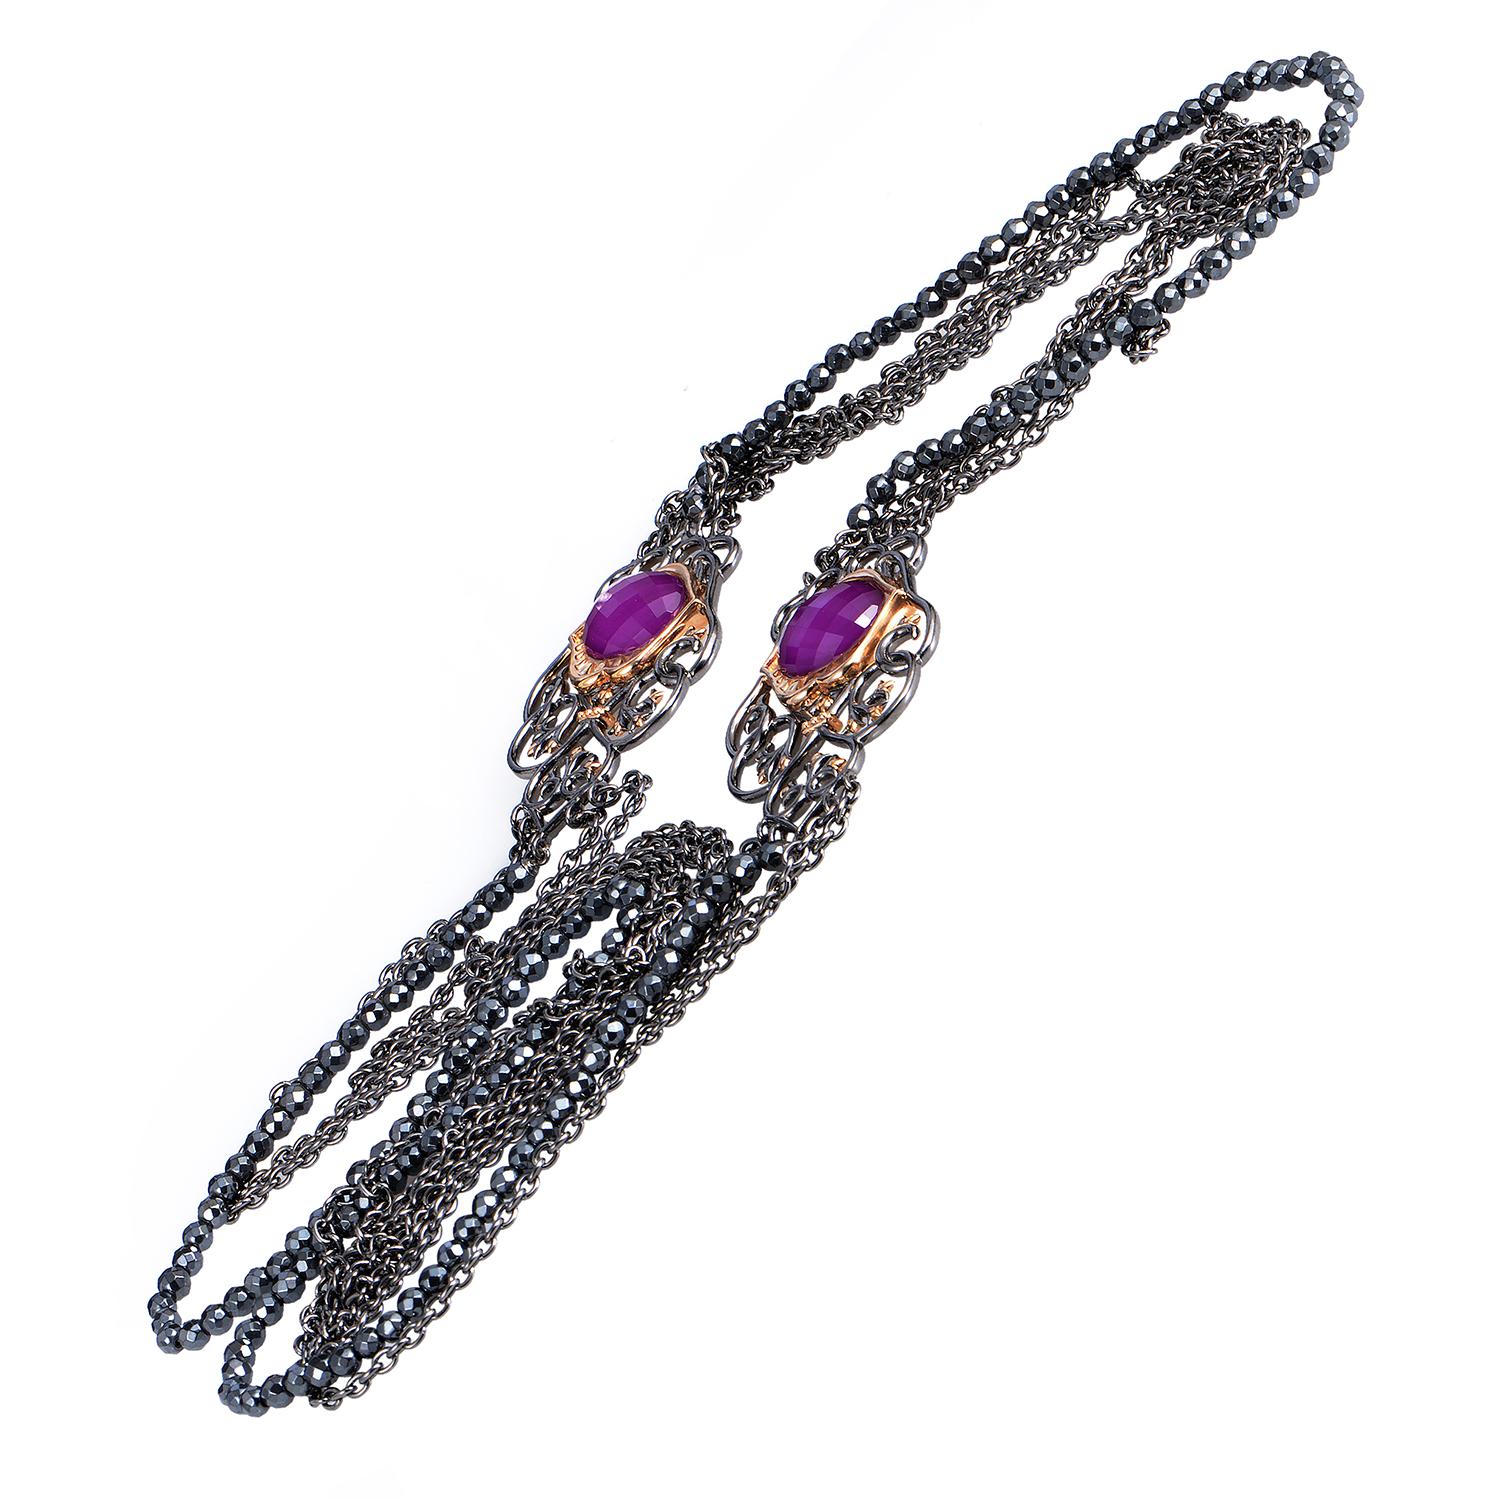 Lined with gorgeous hematite stones and boasting spellbinding décor, this delightful necklace from Stephen Webster is made of elegant silver which forms enchanting filigree patterns around the shark jaws motifs where sugilite and quartz stones